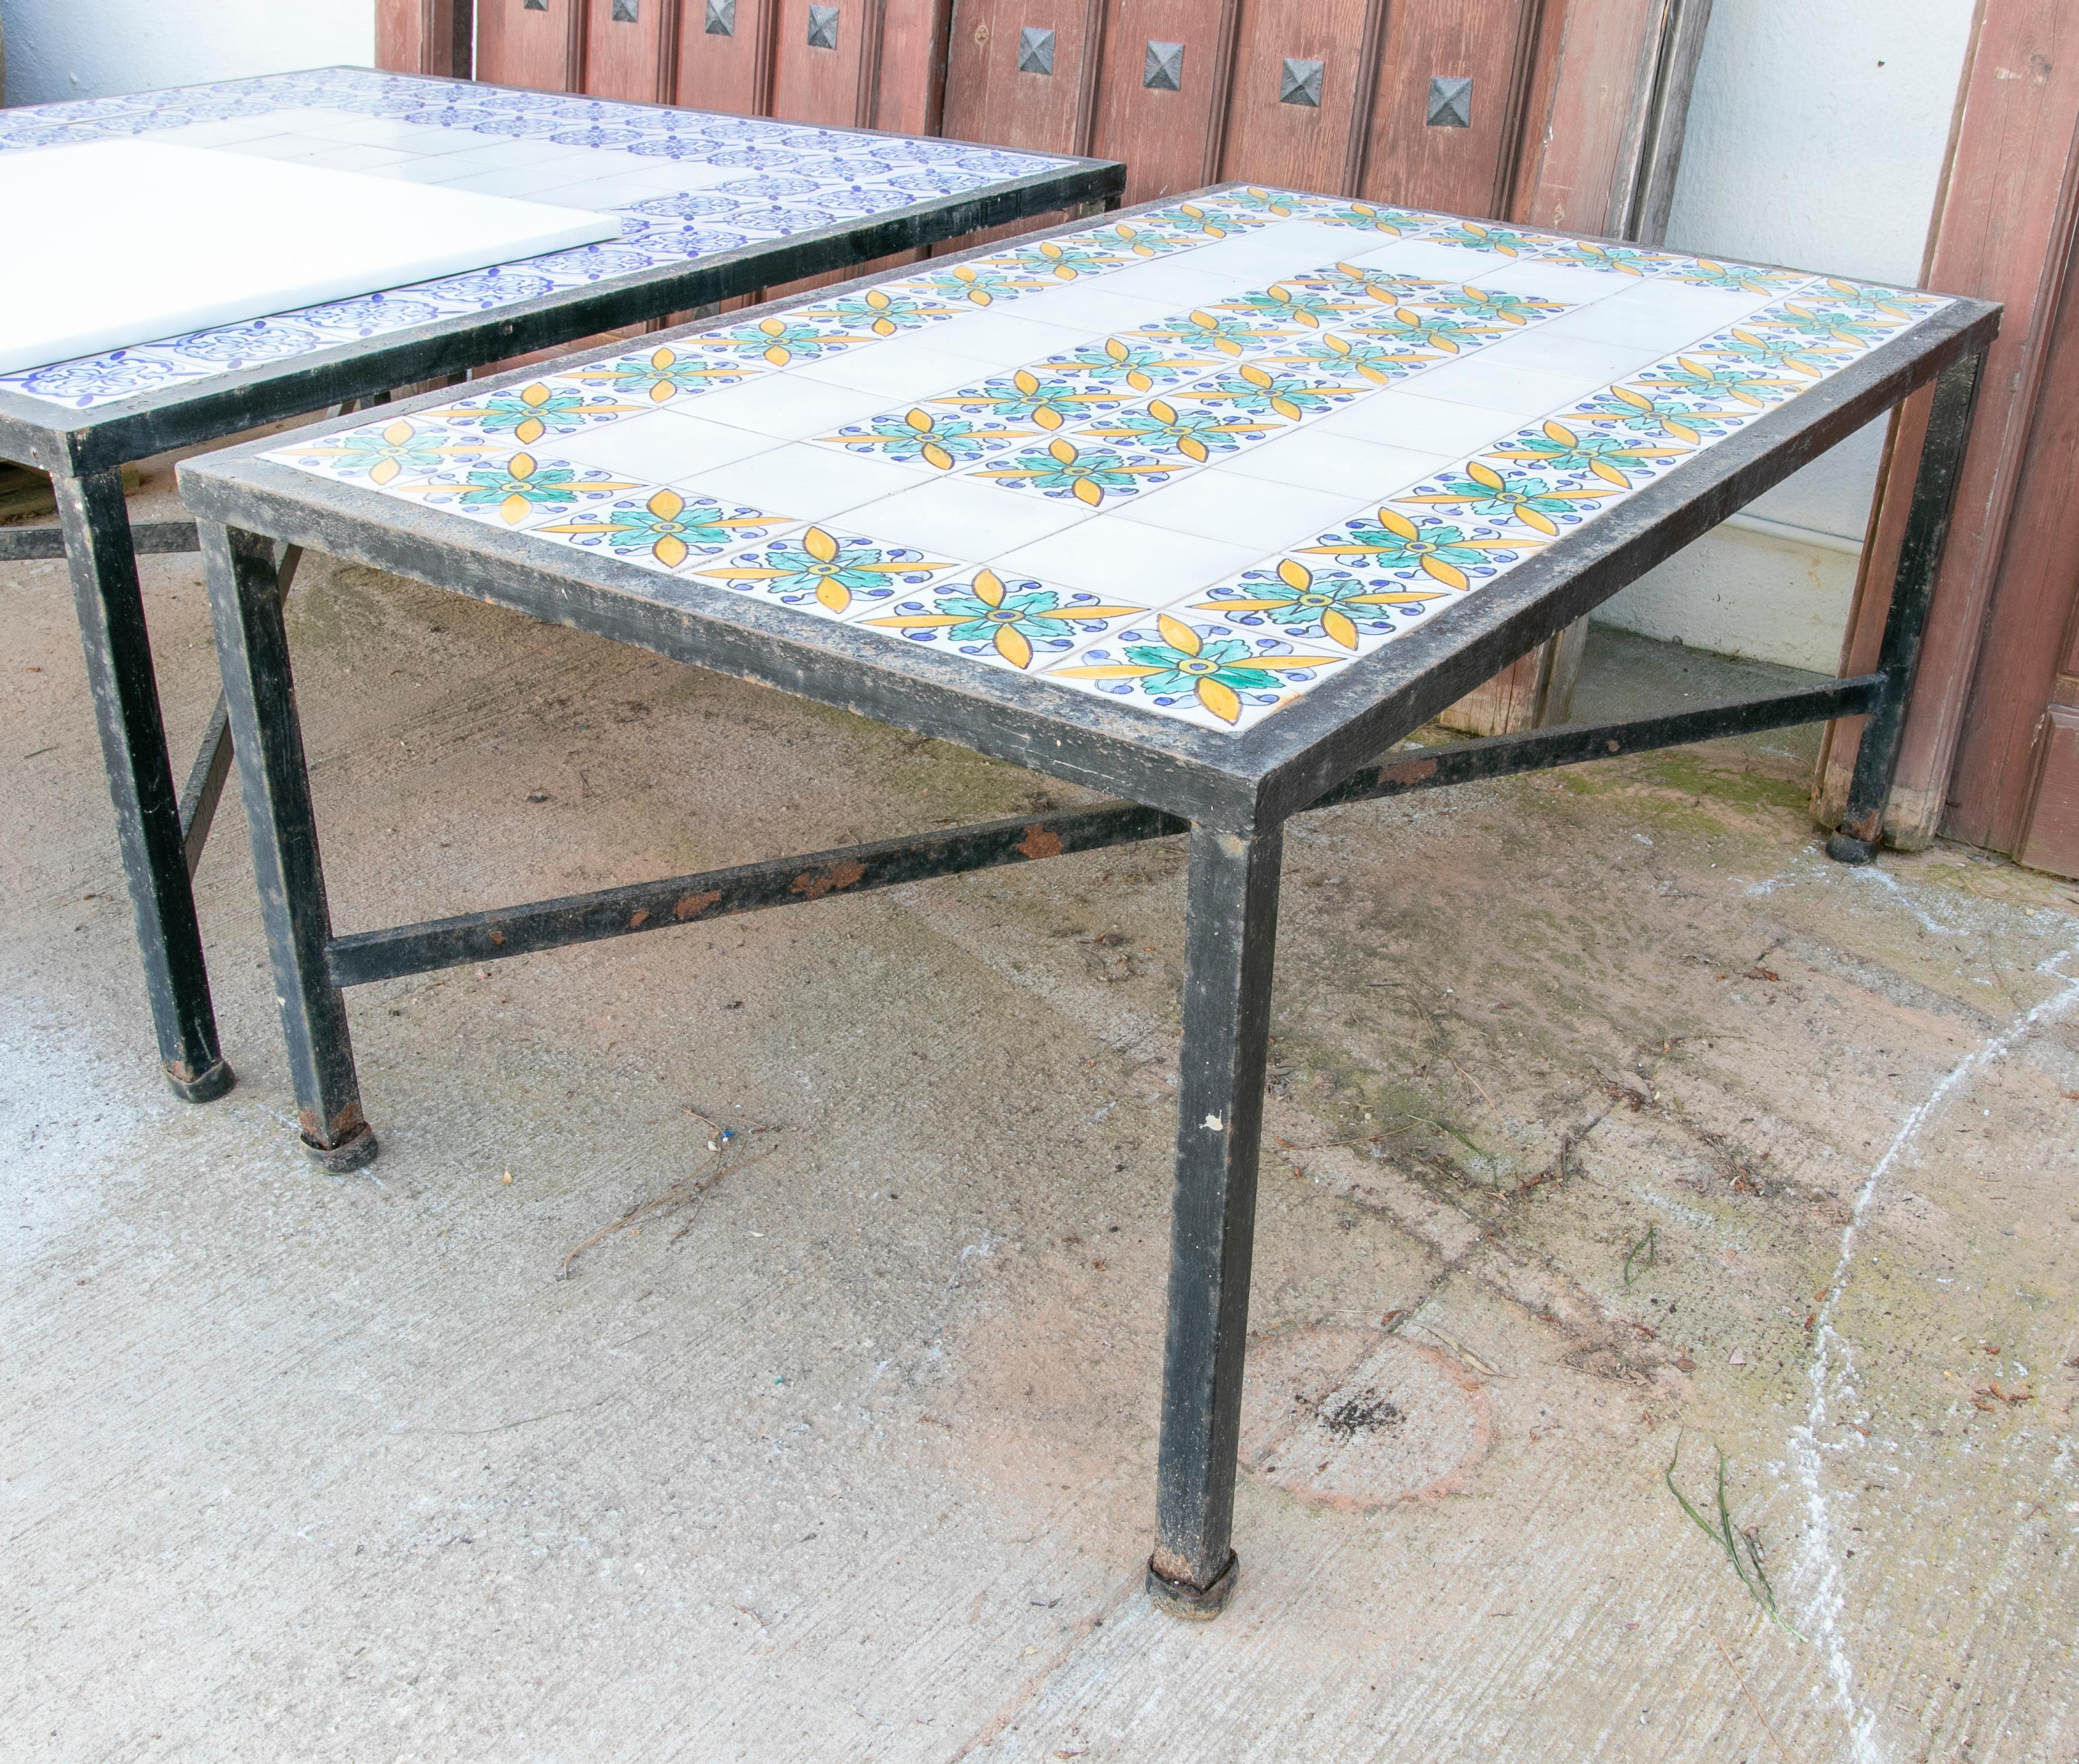 1980s Table with Iron Base and Geometrical Tiles on top.